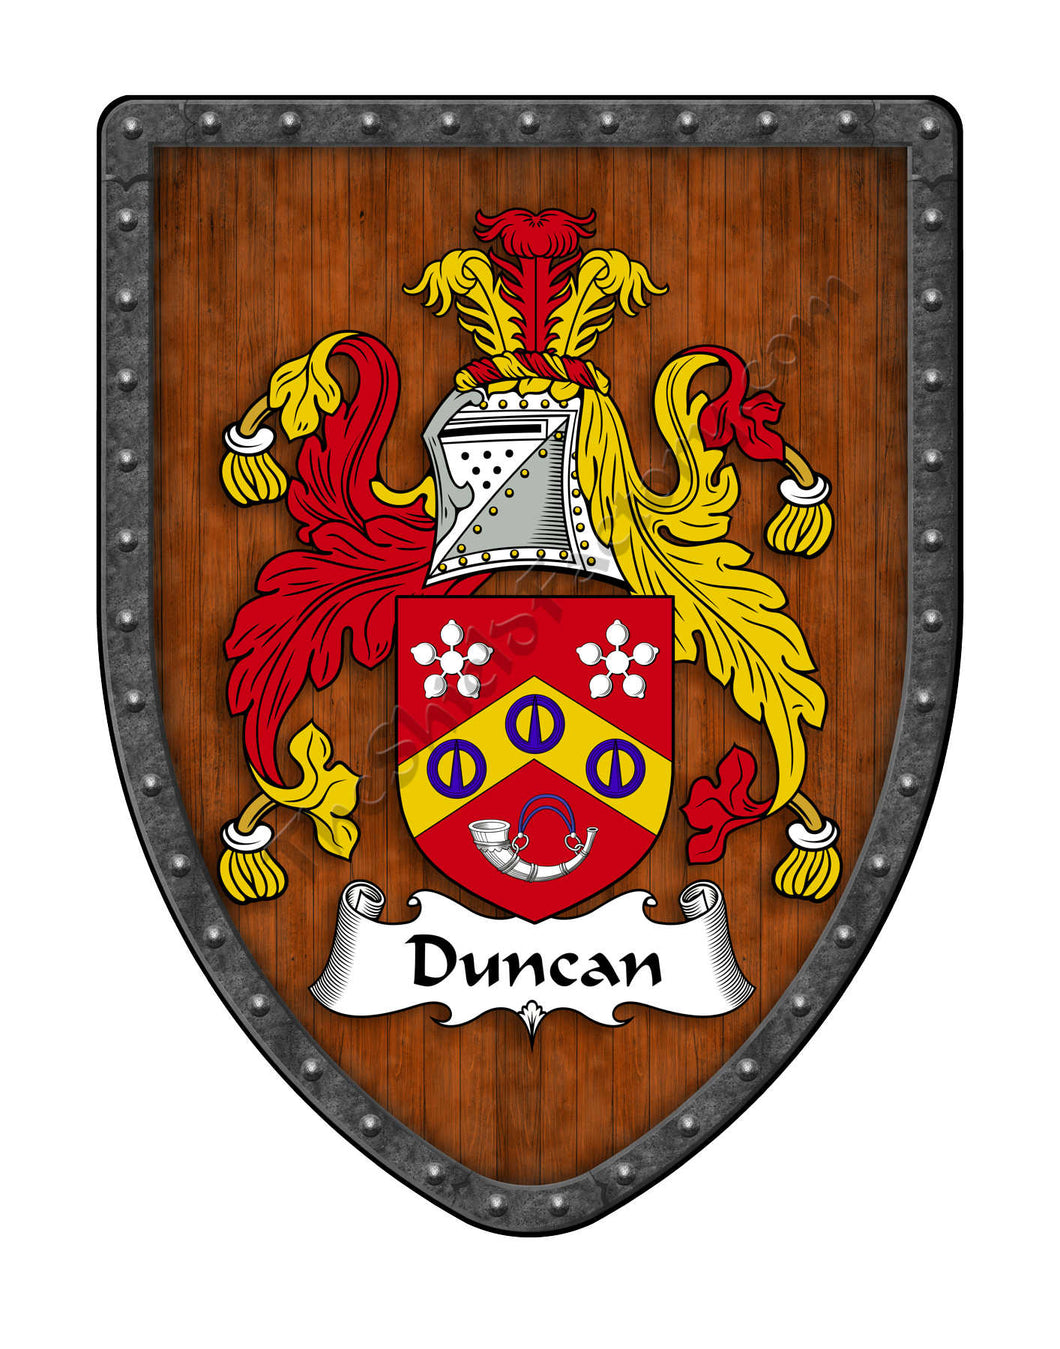 Duncan Family Coat of Arms